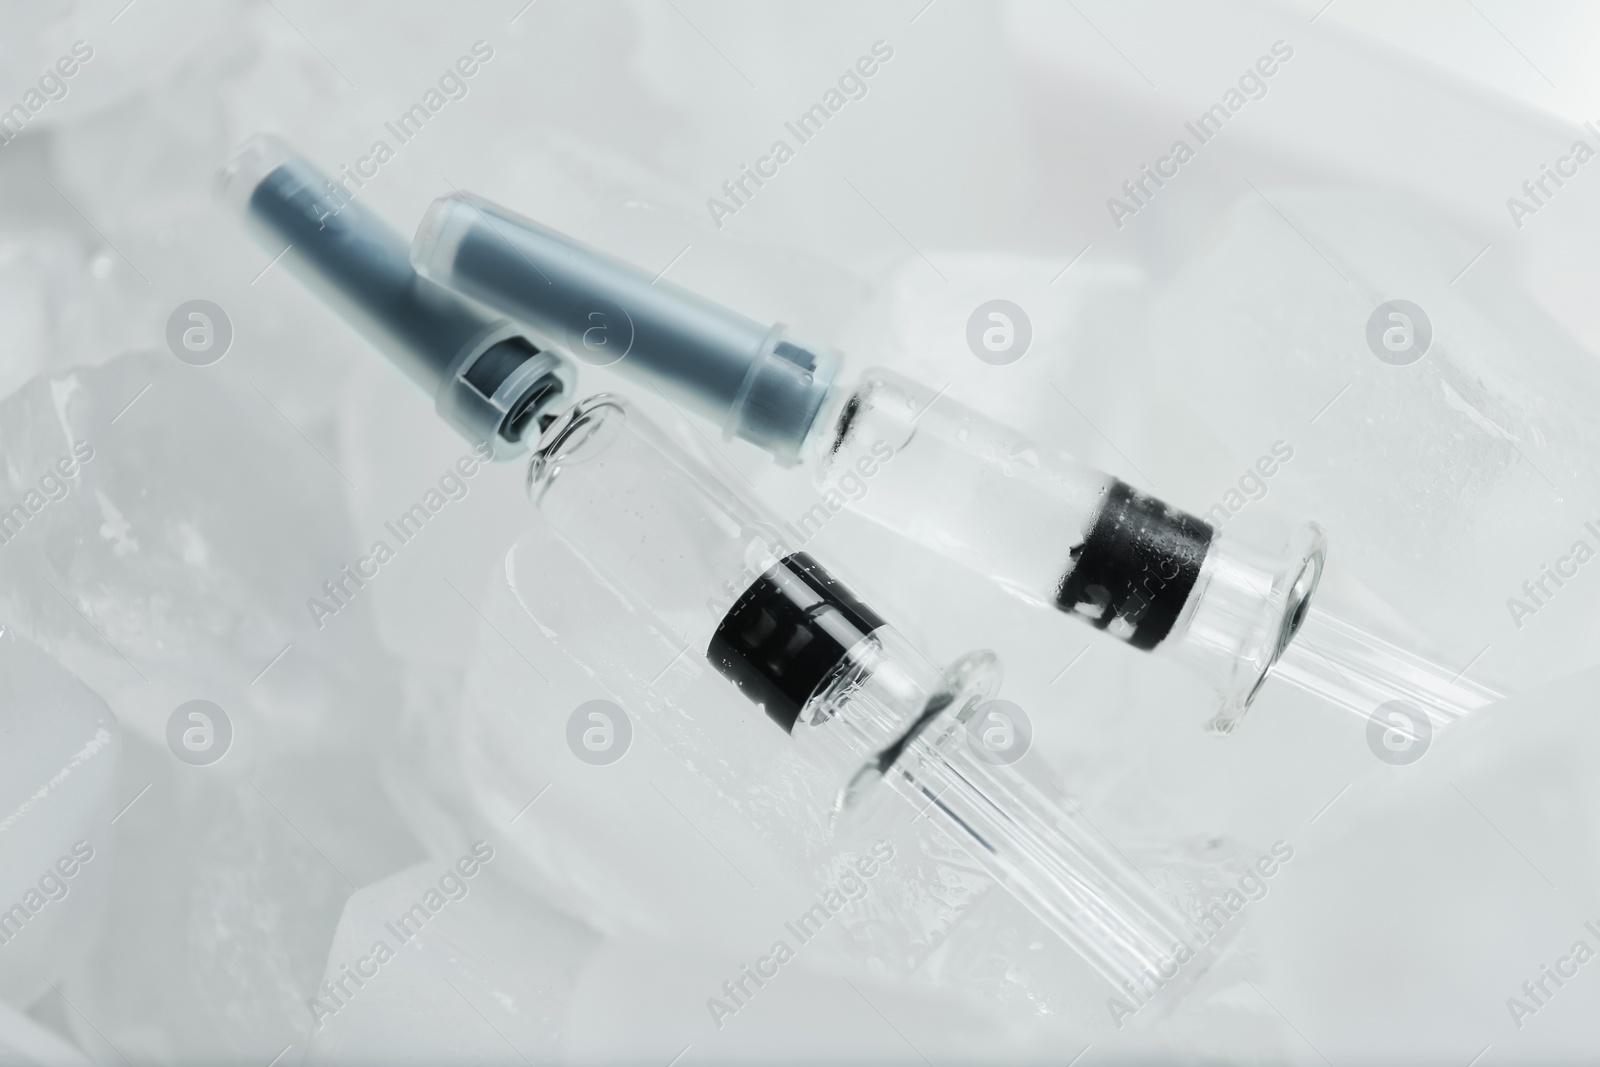 Photo of Syringes with COVID-19 vaccine on ice cubes